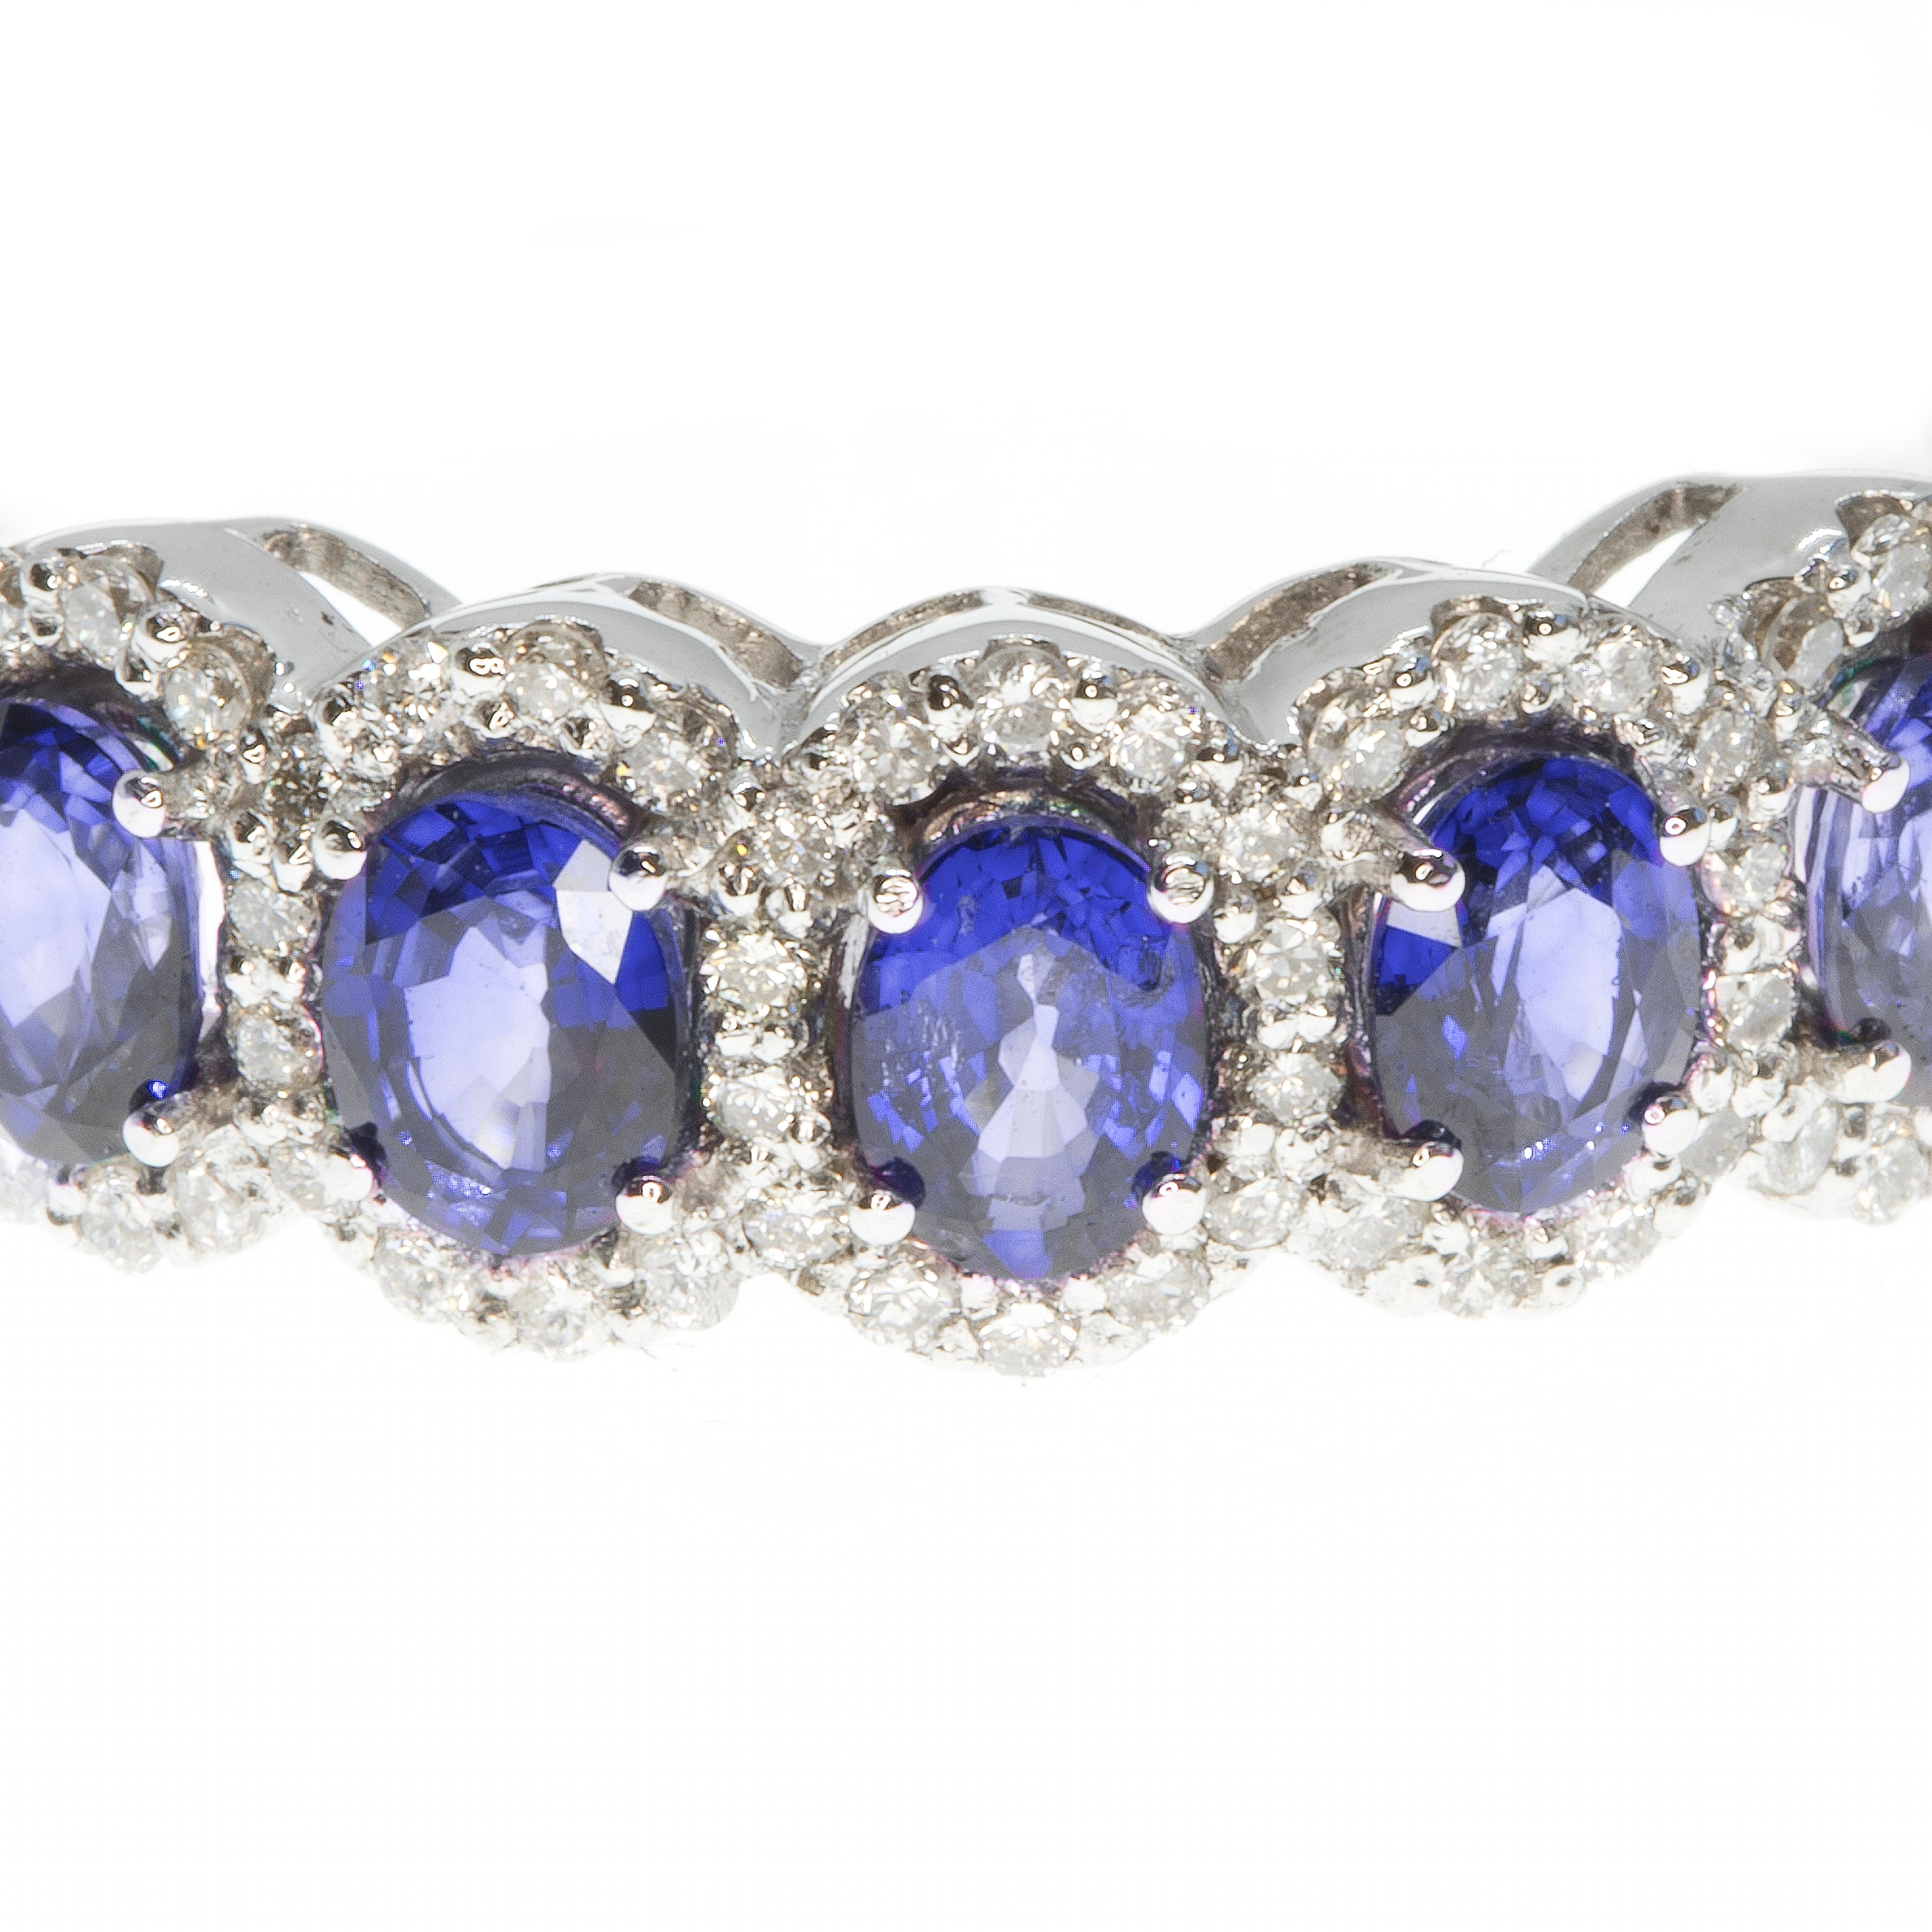 A beautiful ring, masterfully created entirely by hand and featuring carefully selected blue sapphires and white diamonds. The ring has been made from 18-karat white gold.

The ring is equally beautiful on its own or as the jewel of a stack of